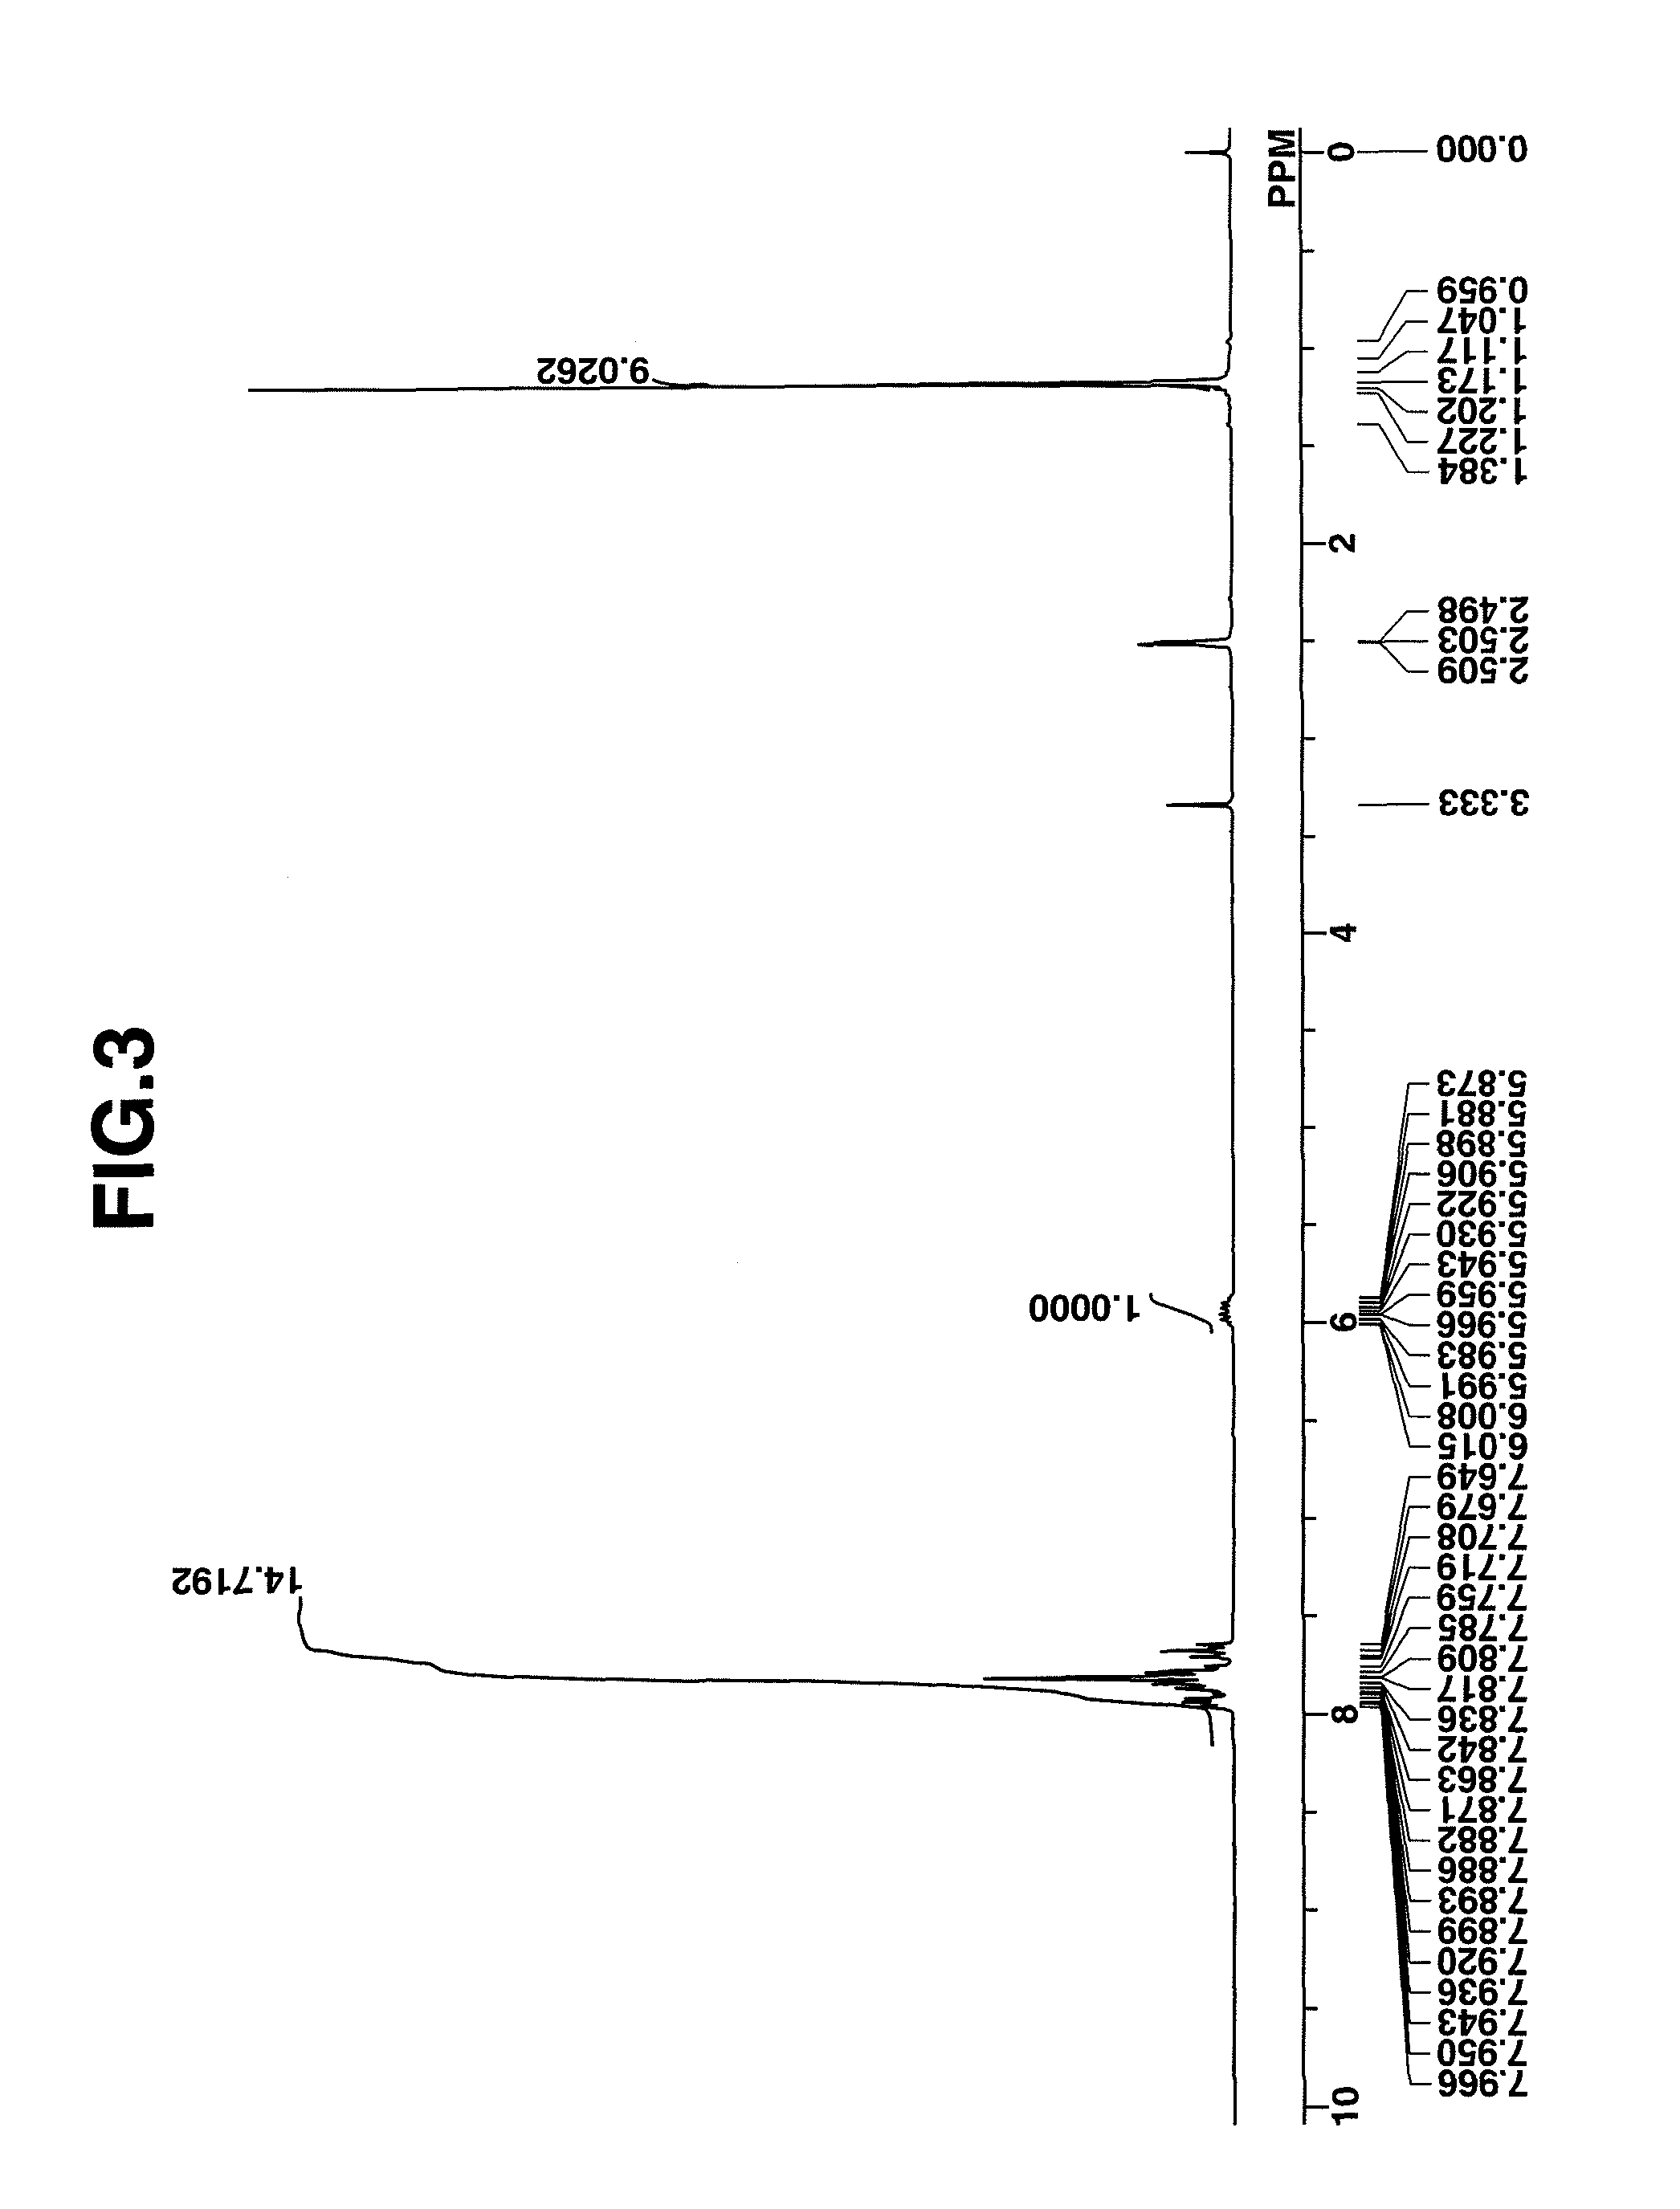 Sulfonium salt-containing polymer, resist composition, patterning process, and sulfonium salt monomer and making method